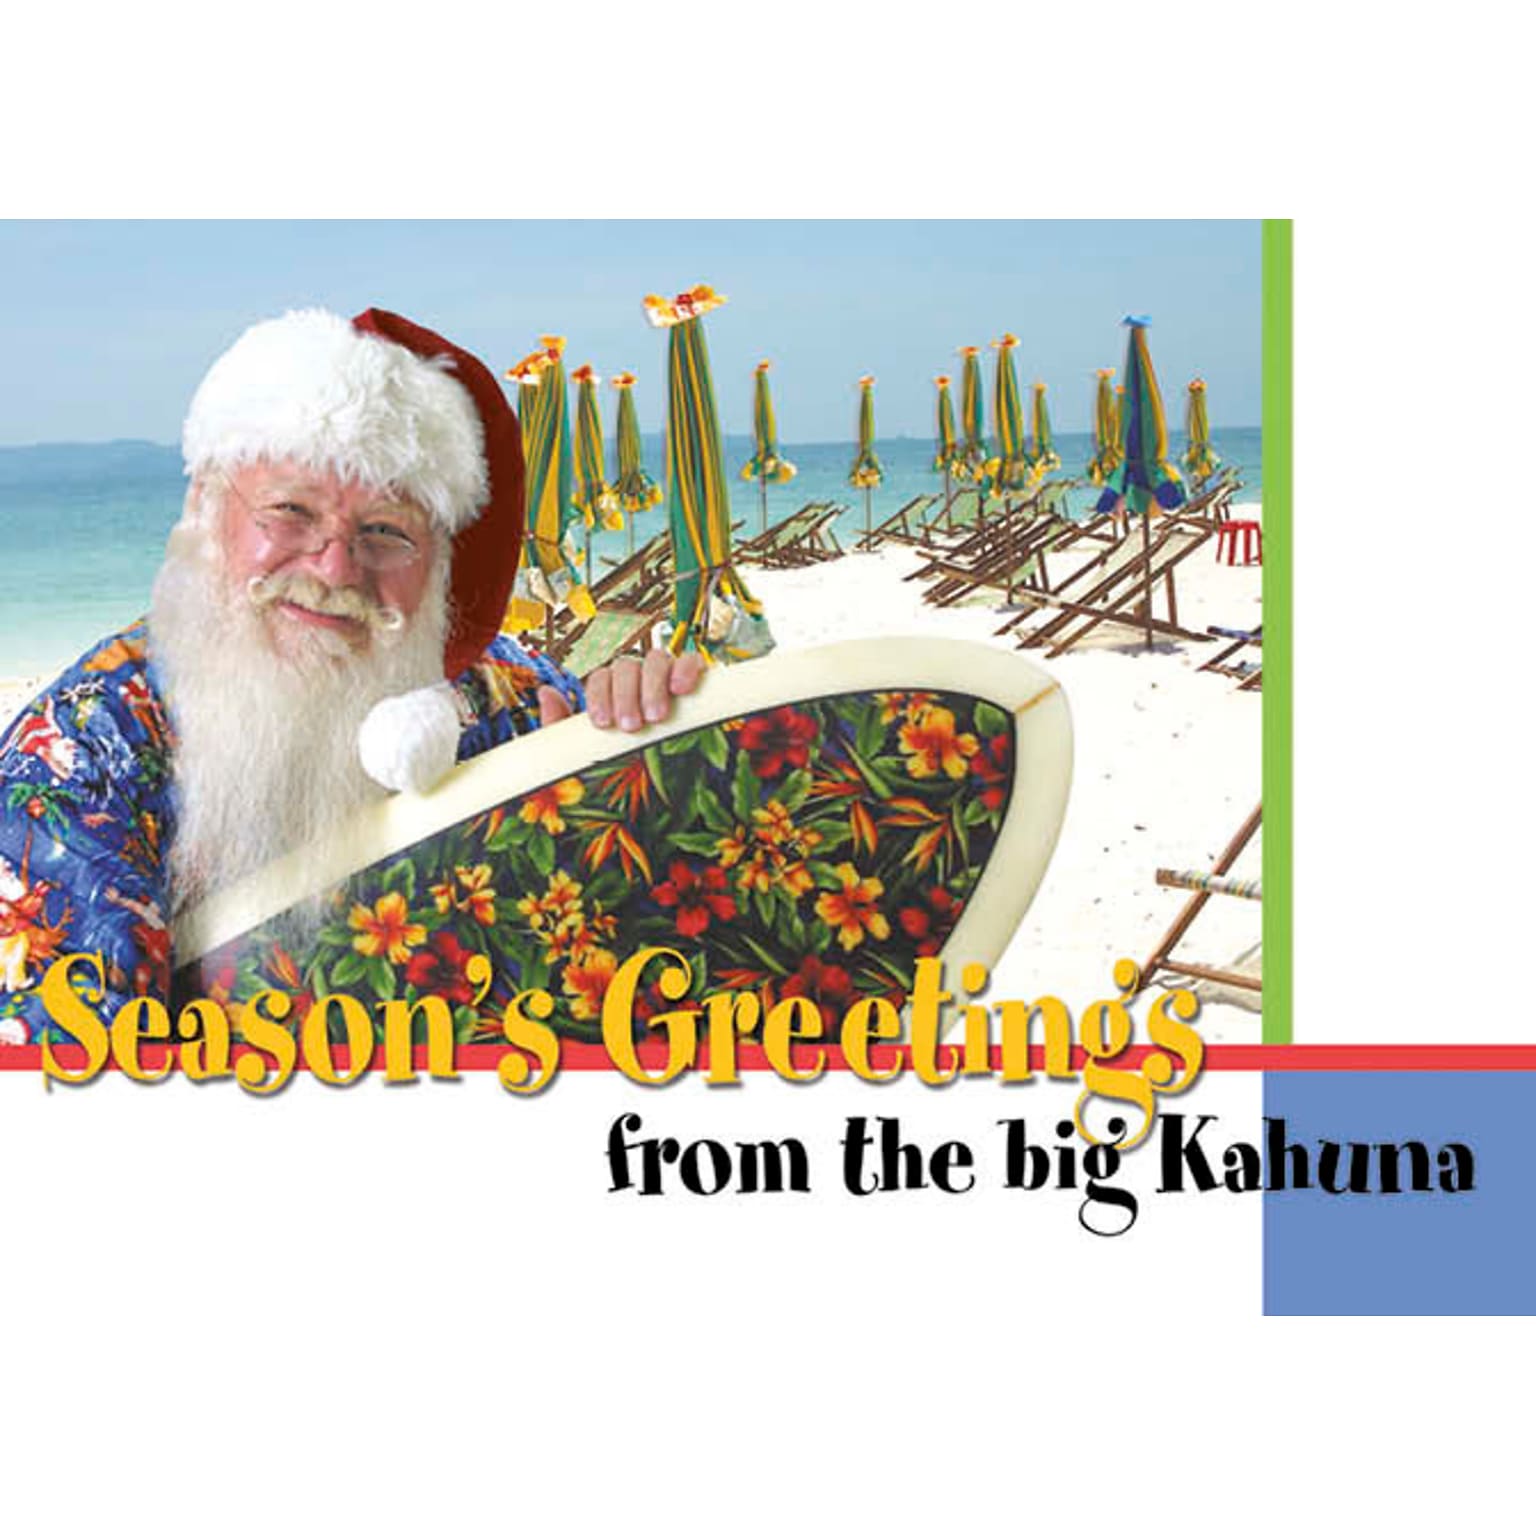 Seasons Greetings From The Big Kahuna Christmas Greeting Cards, With A7 Envelopes, 7 x 5, 25 Cards per Set